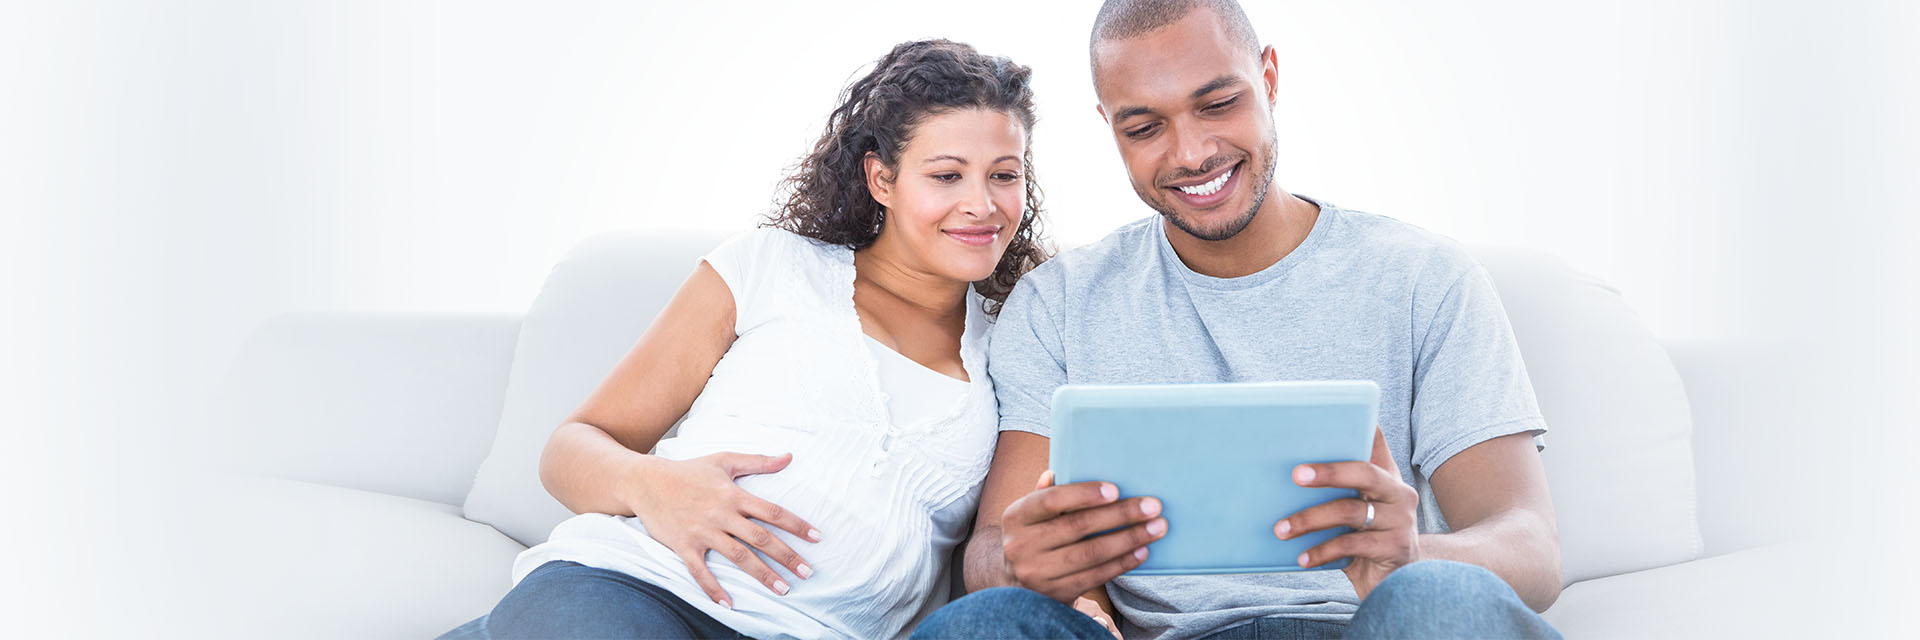 Pregnant couple smiling looking at a tablet